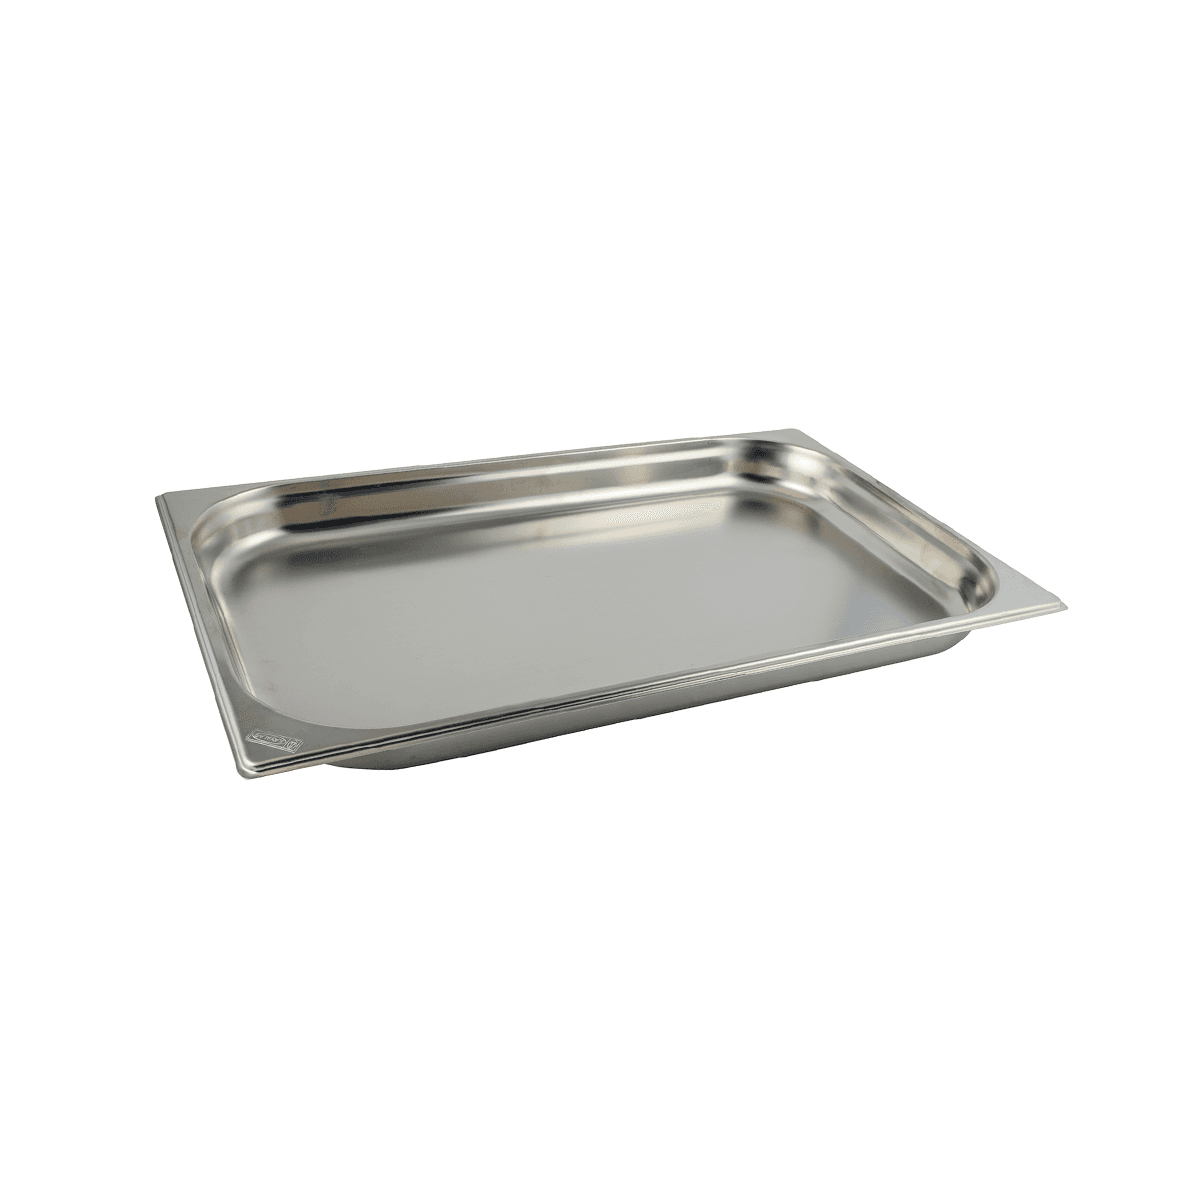 Kayalar Stainless Steel Gastronorm Container GN 1/1-40 mm Silver Stainless Steel